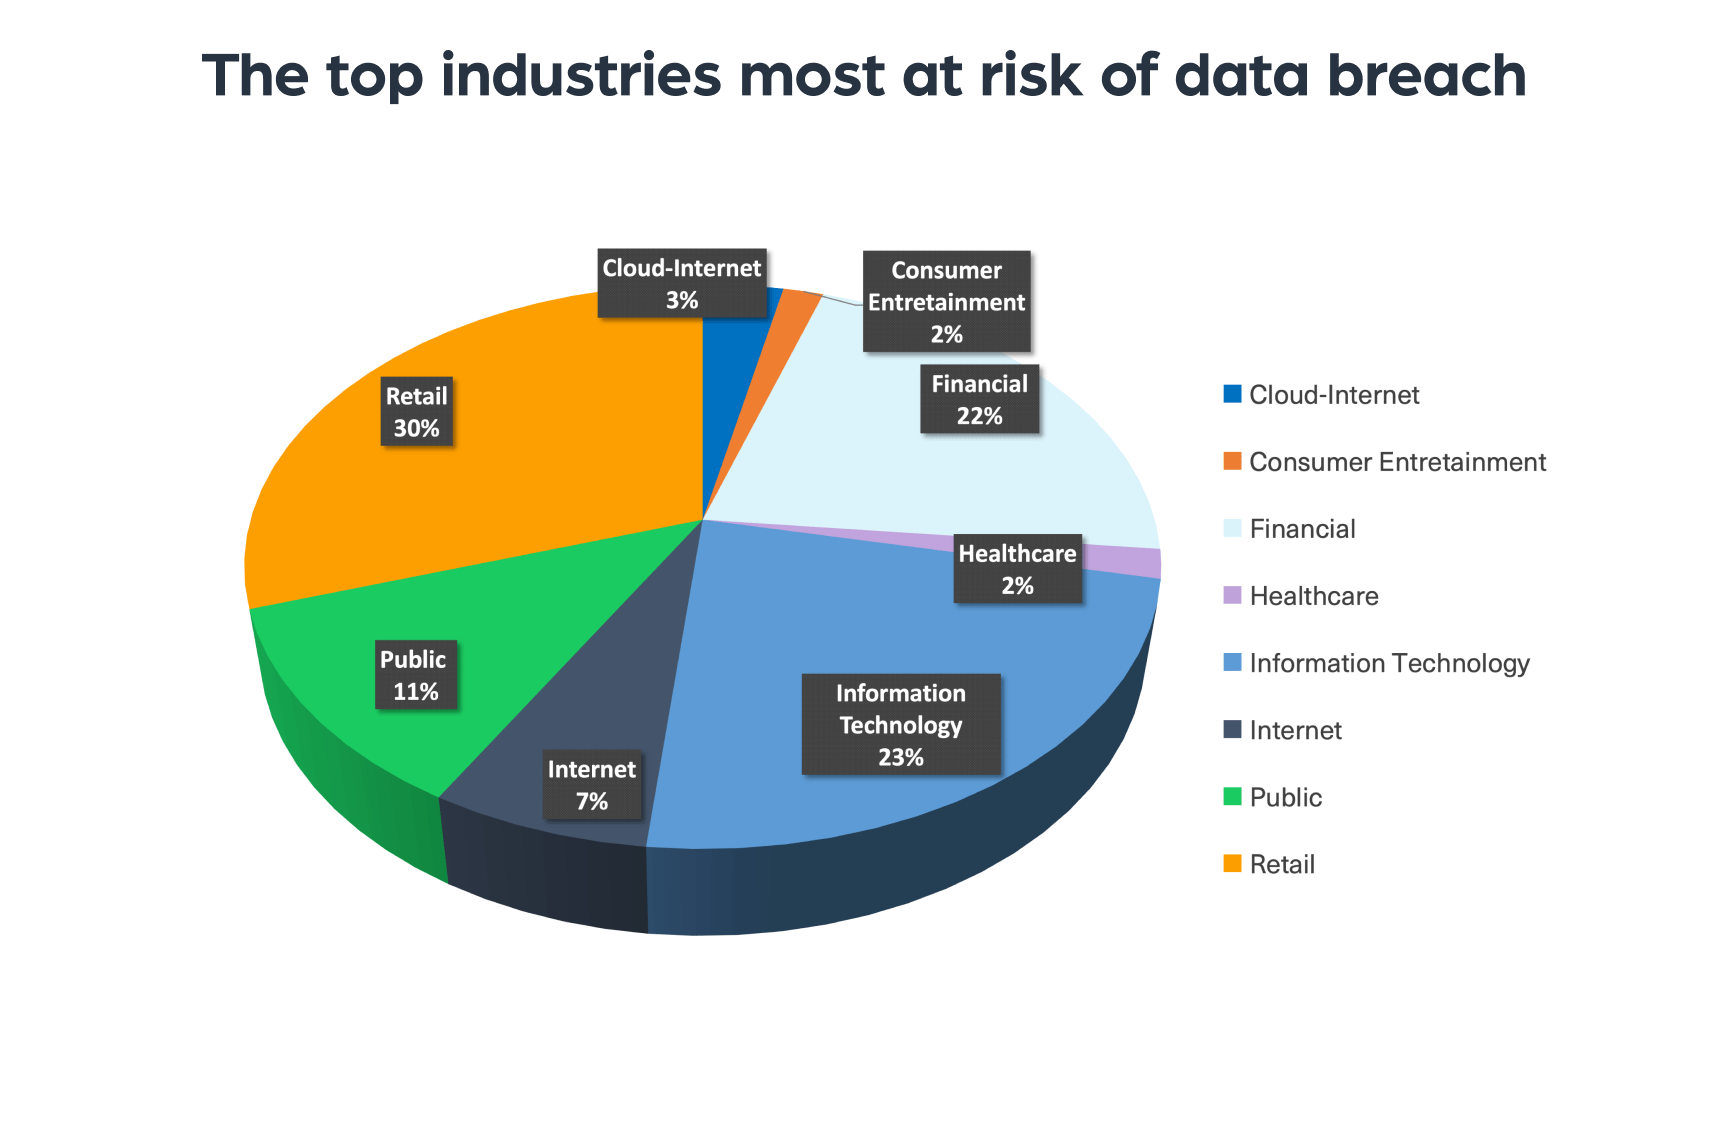 The top industries most at risk of data breach